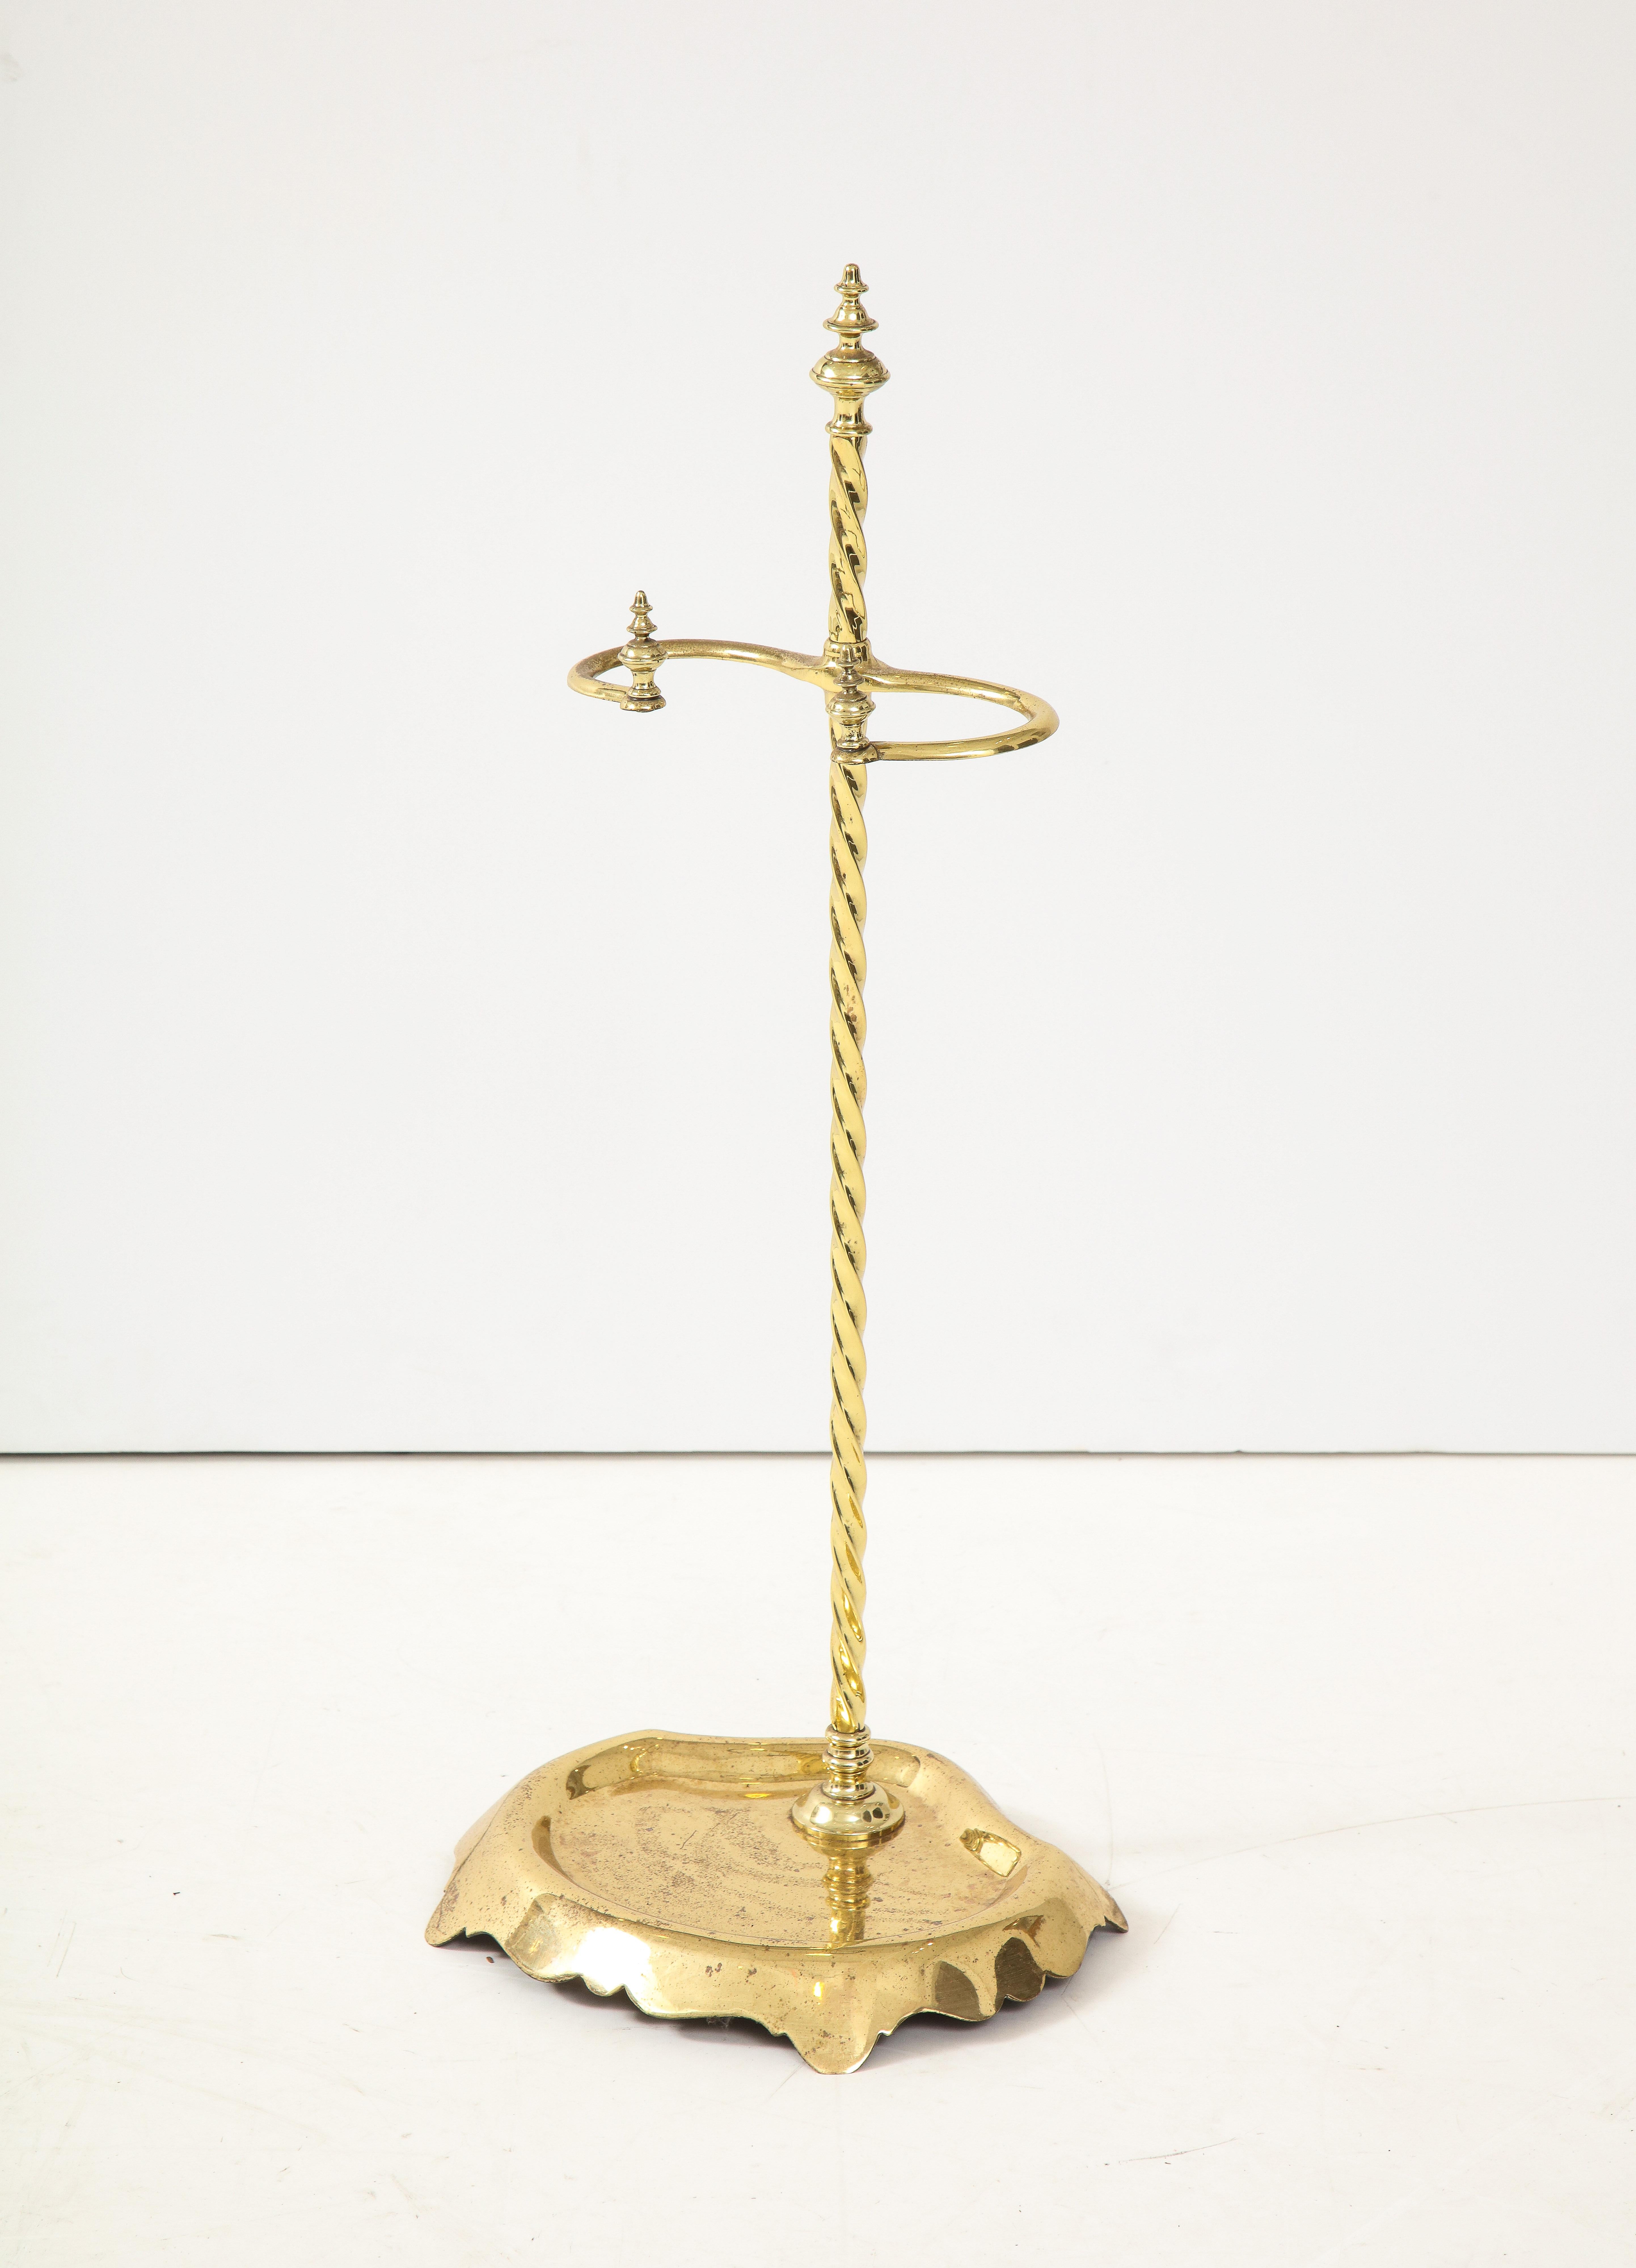 Good 19th century brass fire tool stand having turned steeple finial over spiral twist shaft with two crook arms over cast brass base with scalloped shape and feet.
 